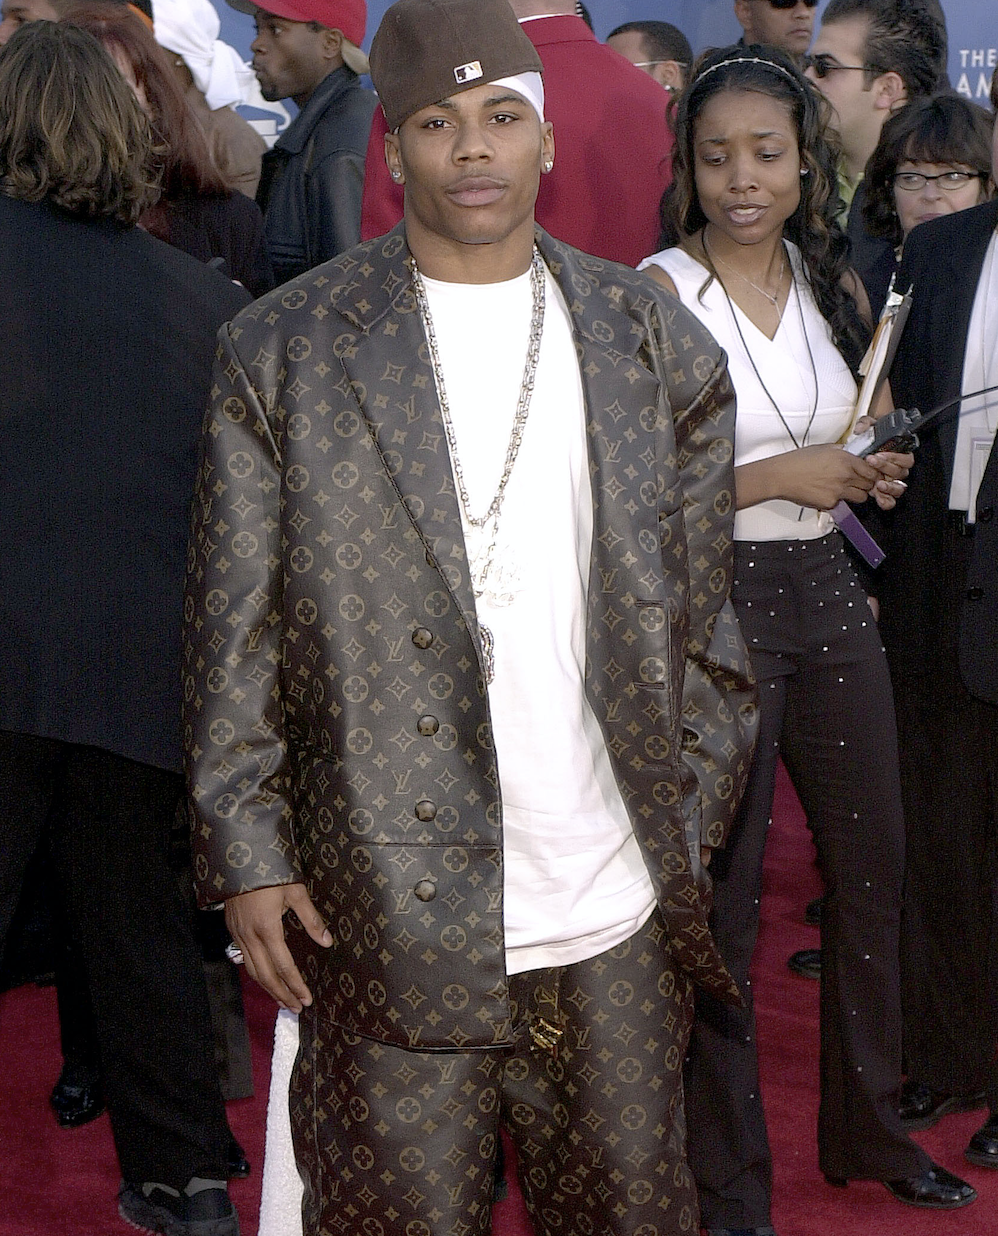 Nelly’s Flashiest Fashion Moments